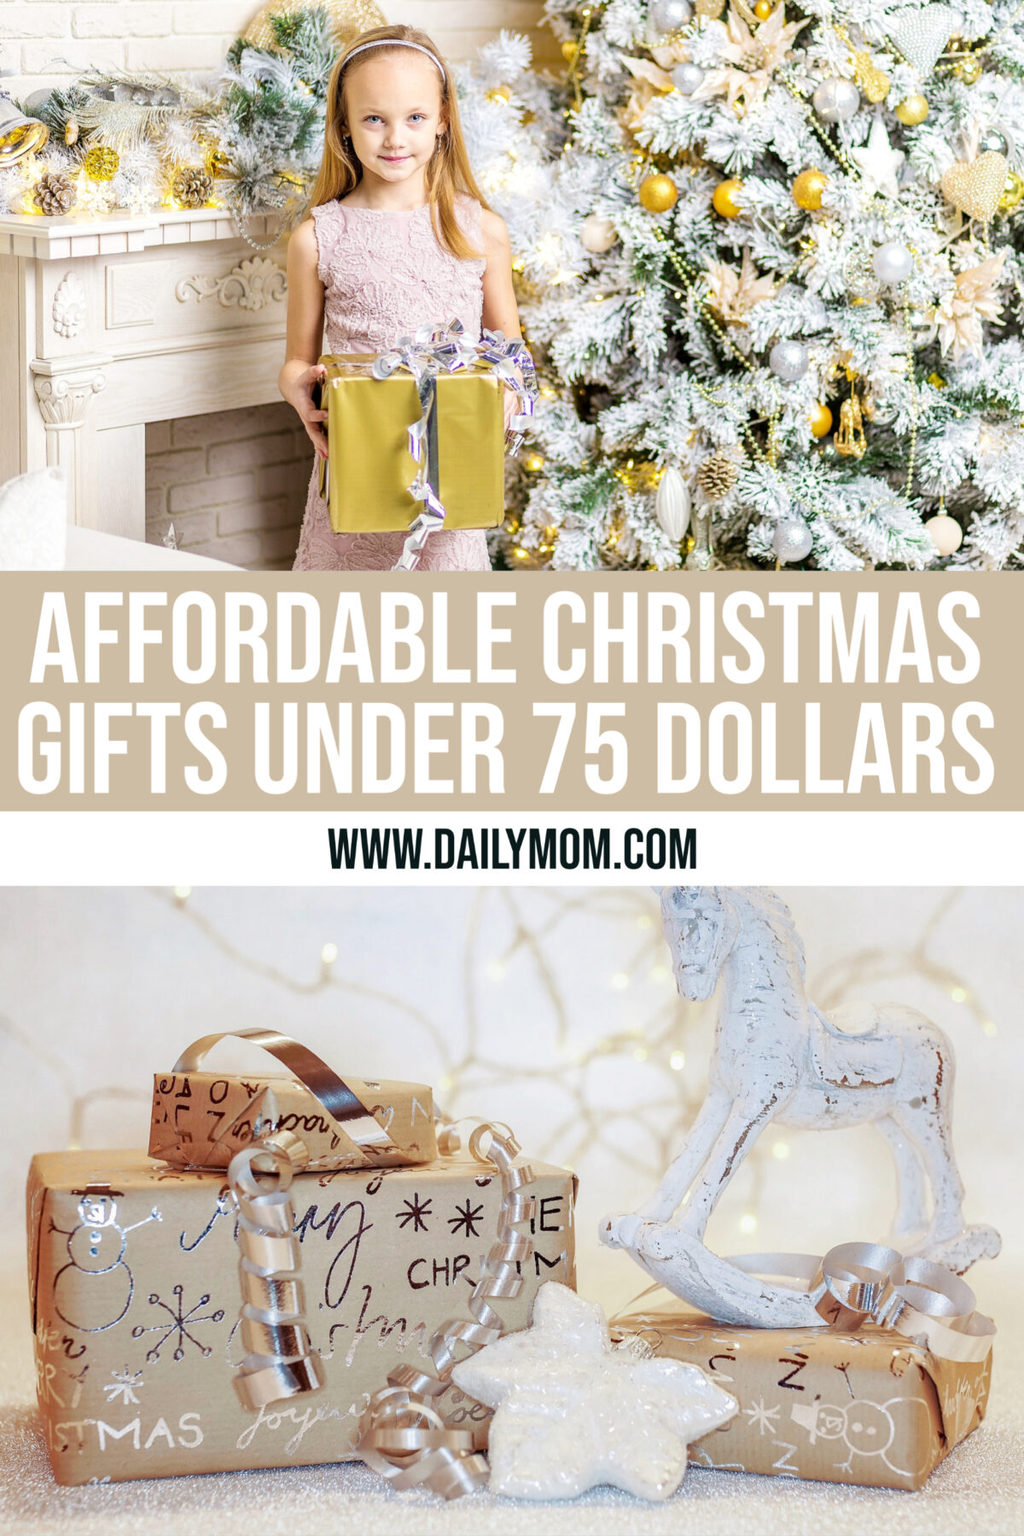 20 Affordable Christmas Gifts Under  Dollars For Those Who Don’T Want Anything